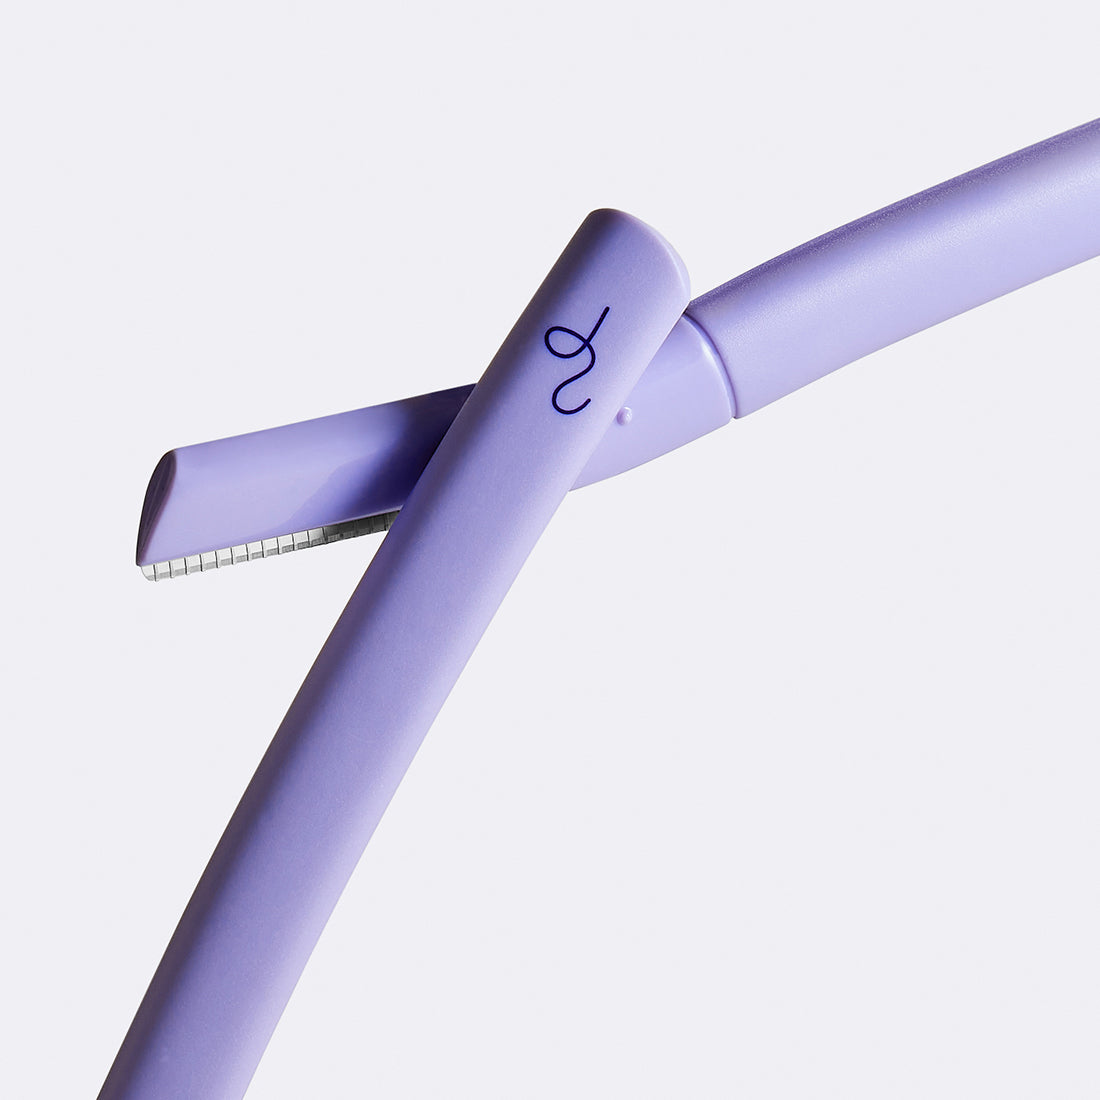 Two lilac Flamingo Disposable Dermaplane Razors crossing over each other with the dark purple bird mark logo visible on one